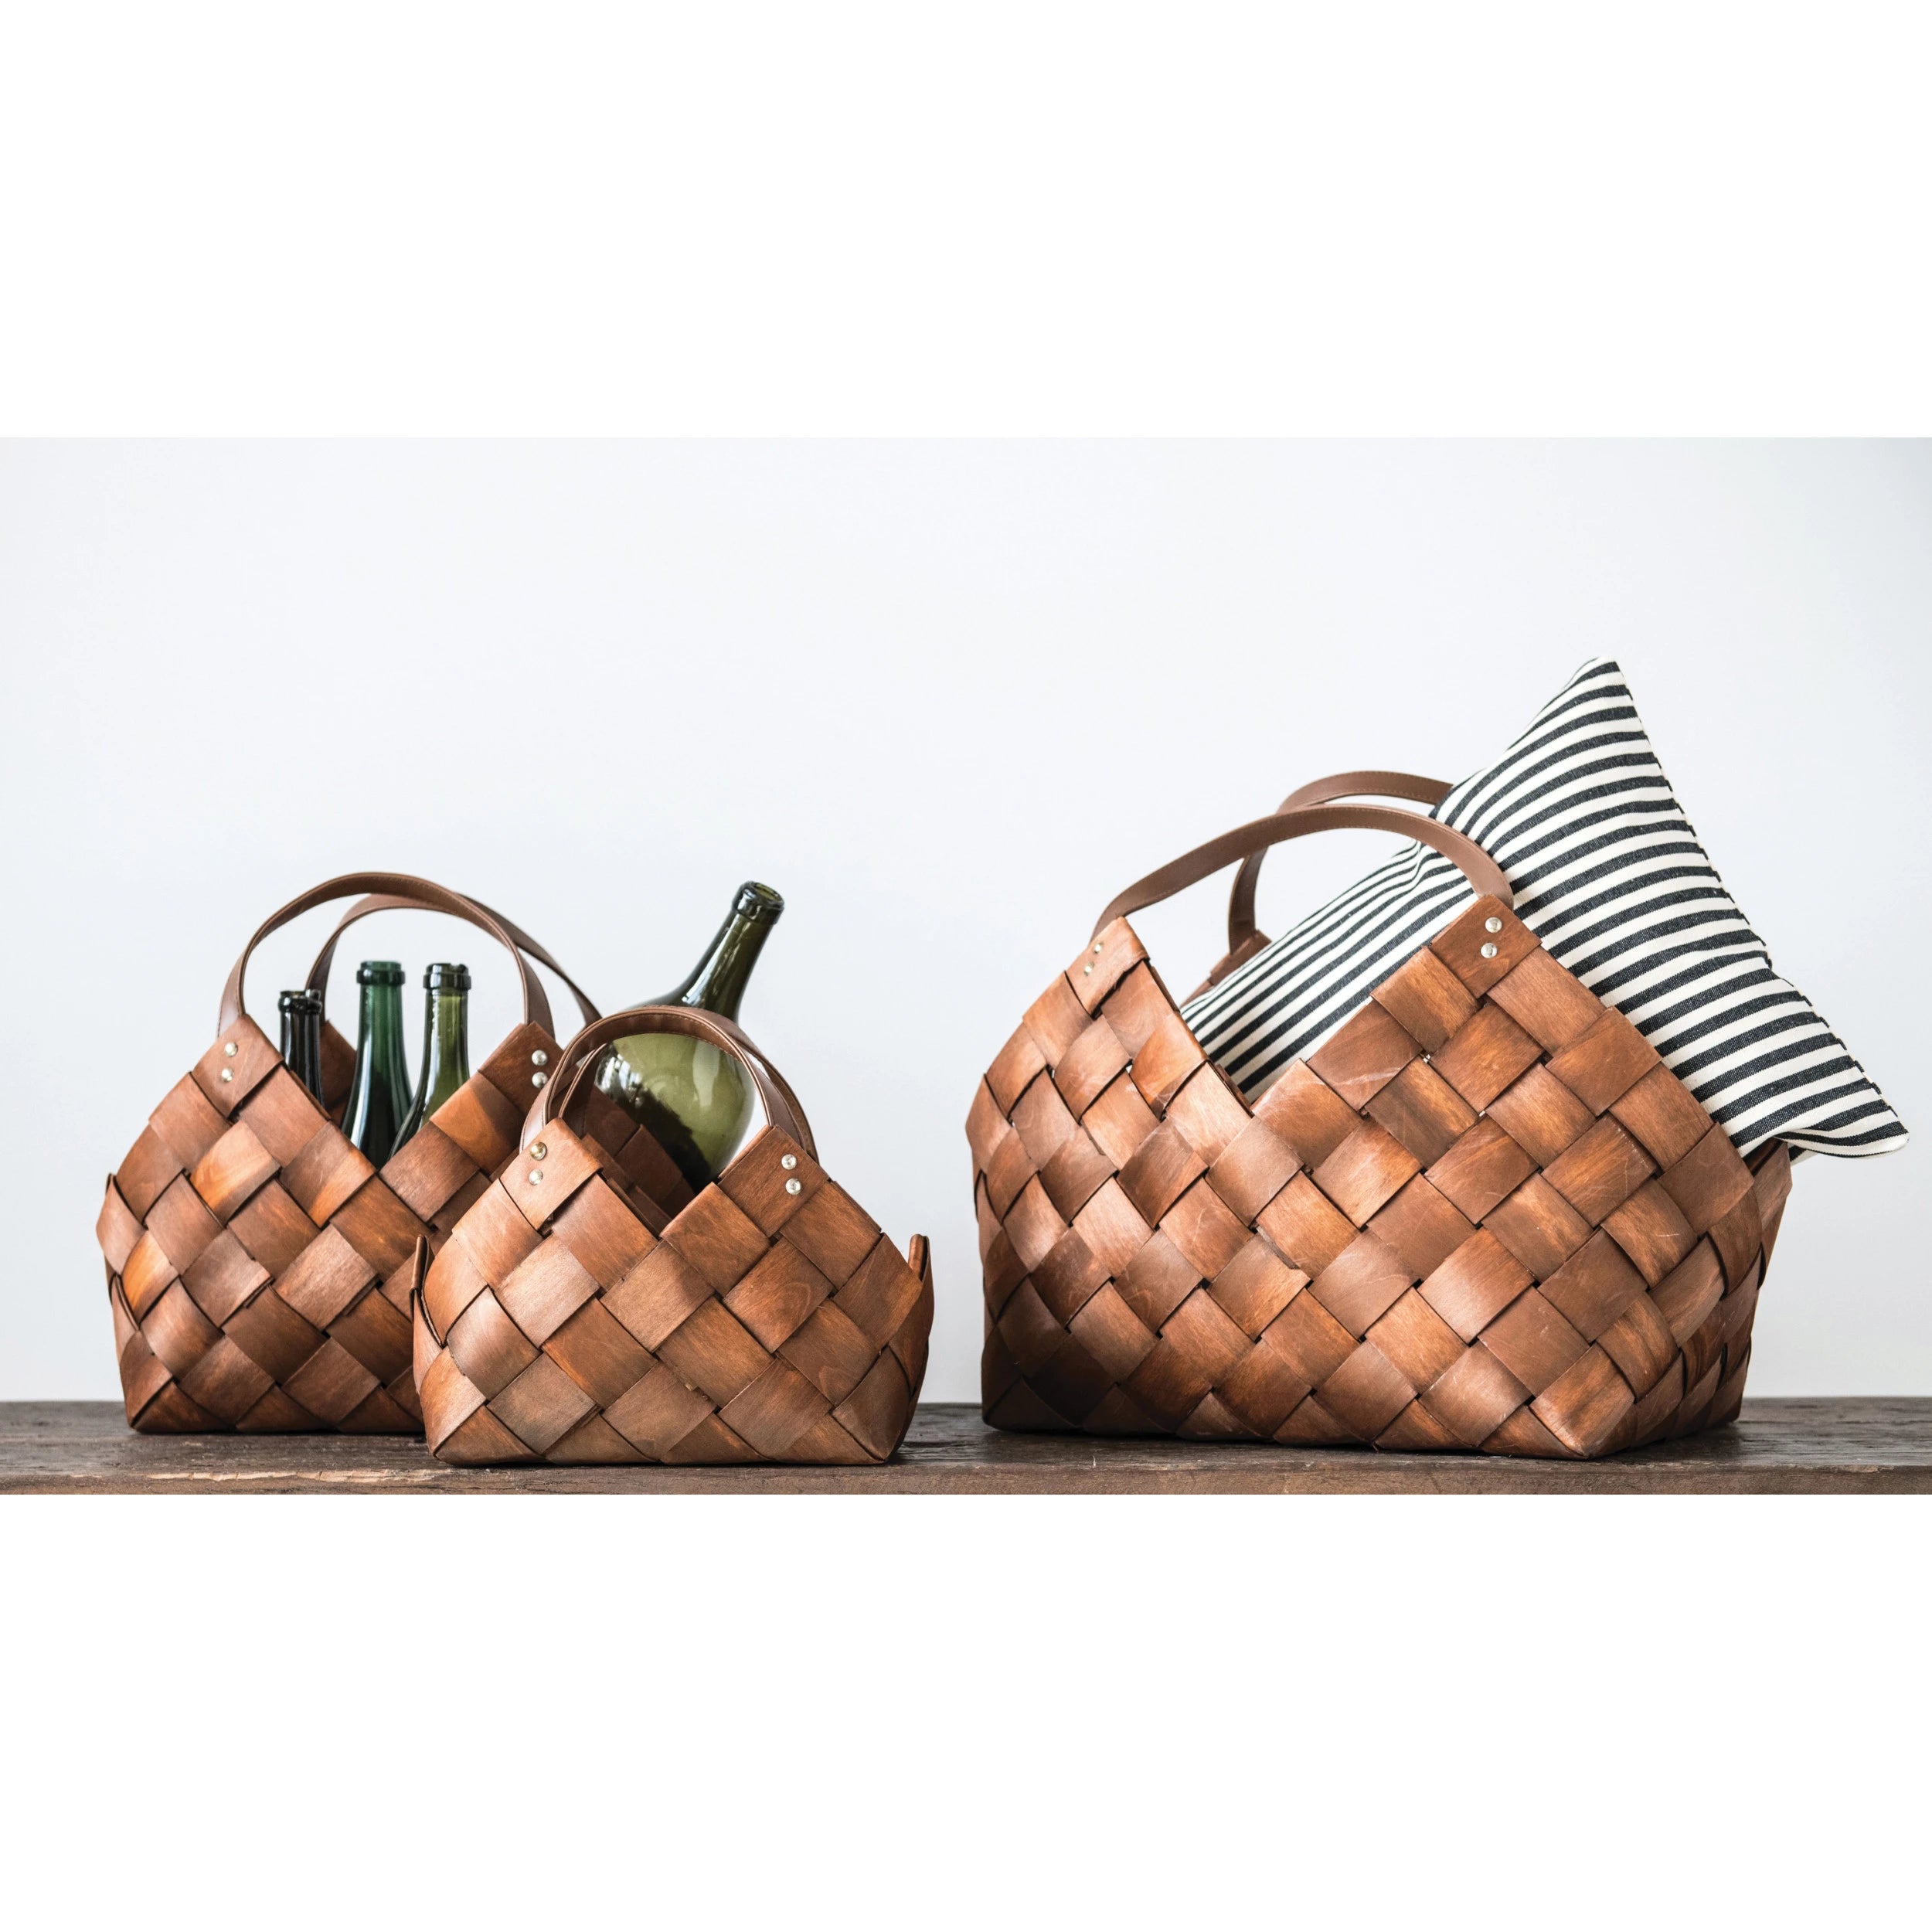 Woven Seagrass Basket with Leather Handles